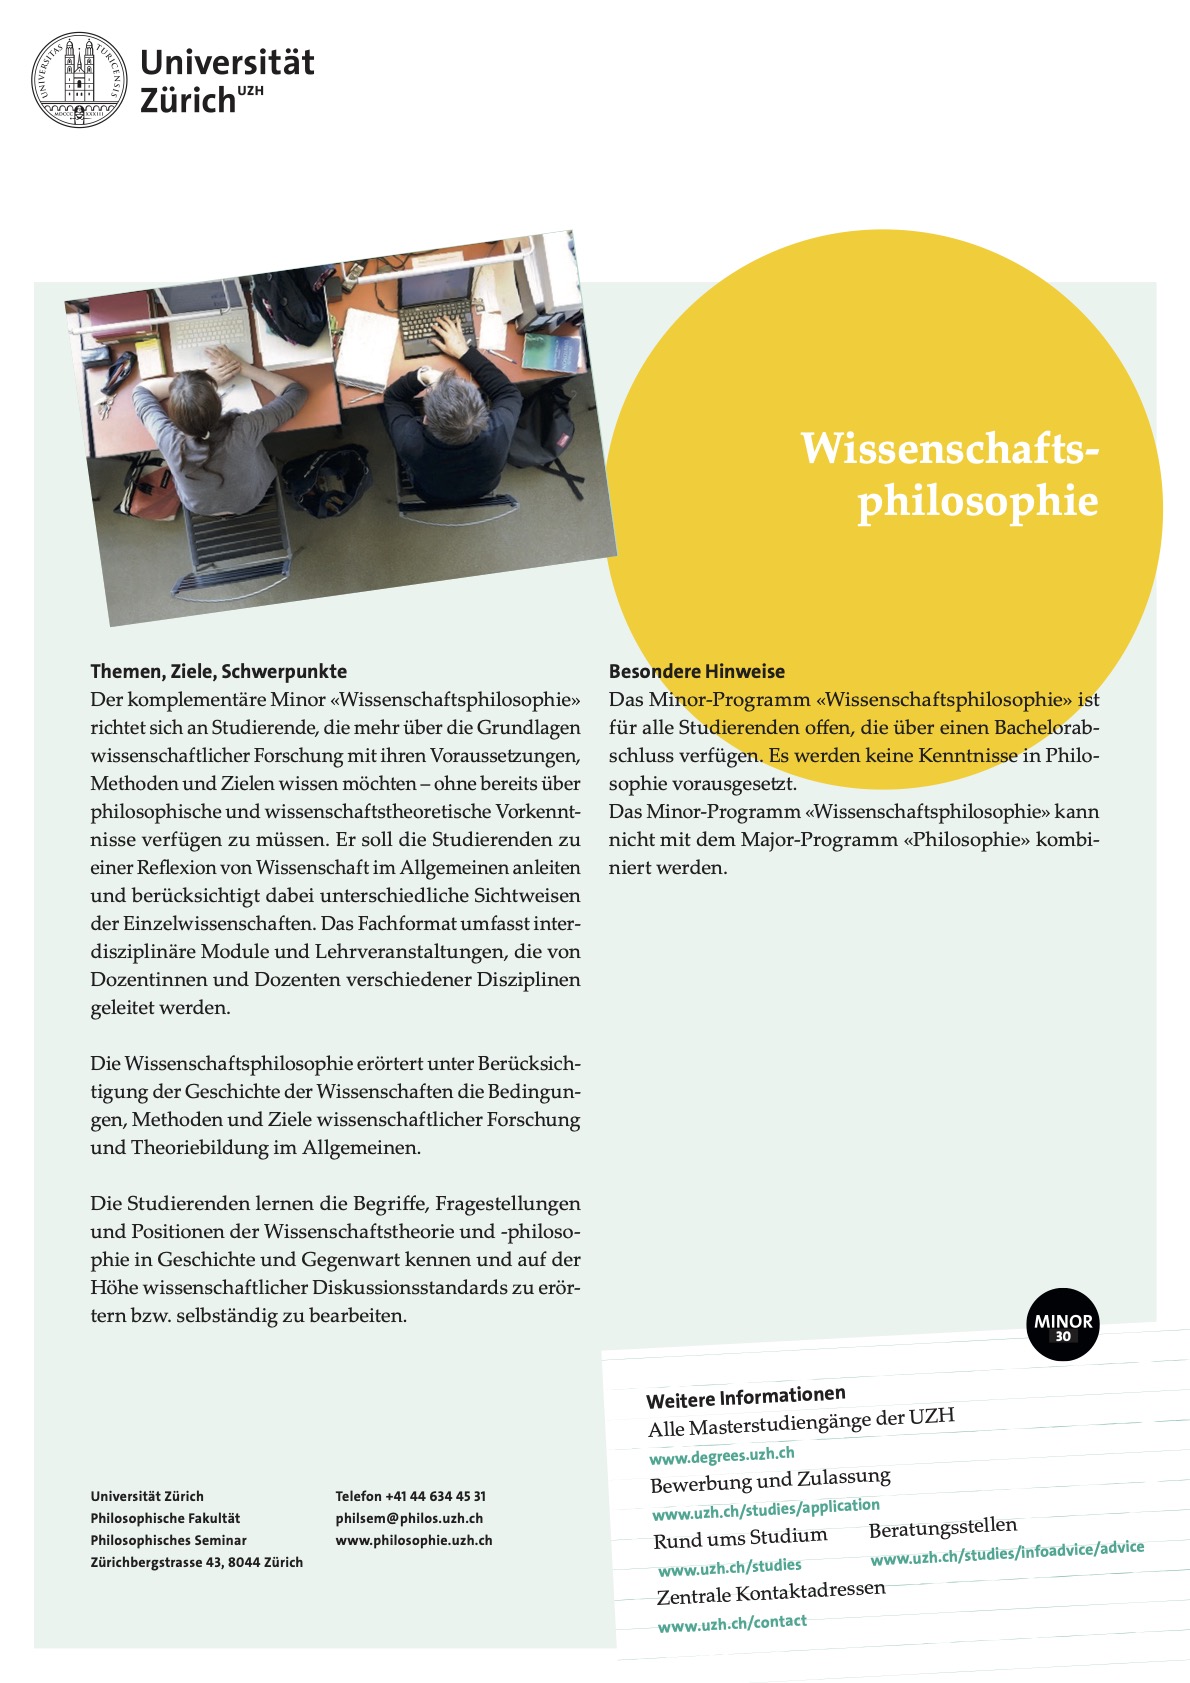 Flyer for prospective students for the Minor in the Philosophy of Science (German only)